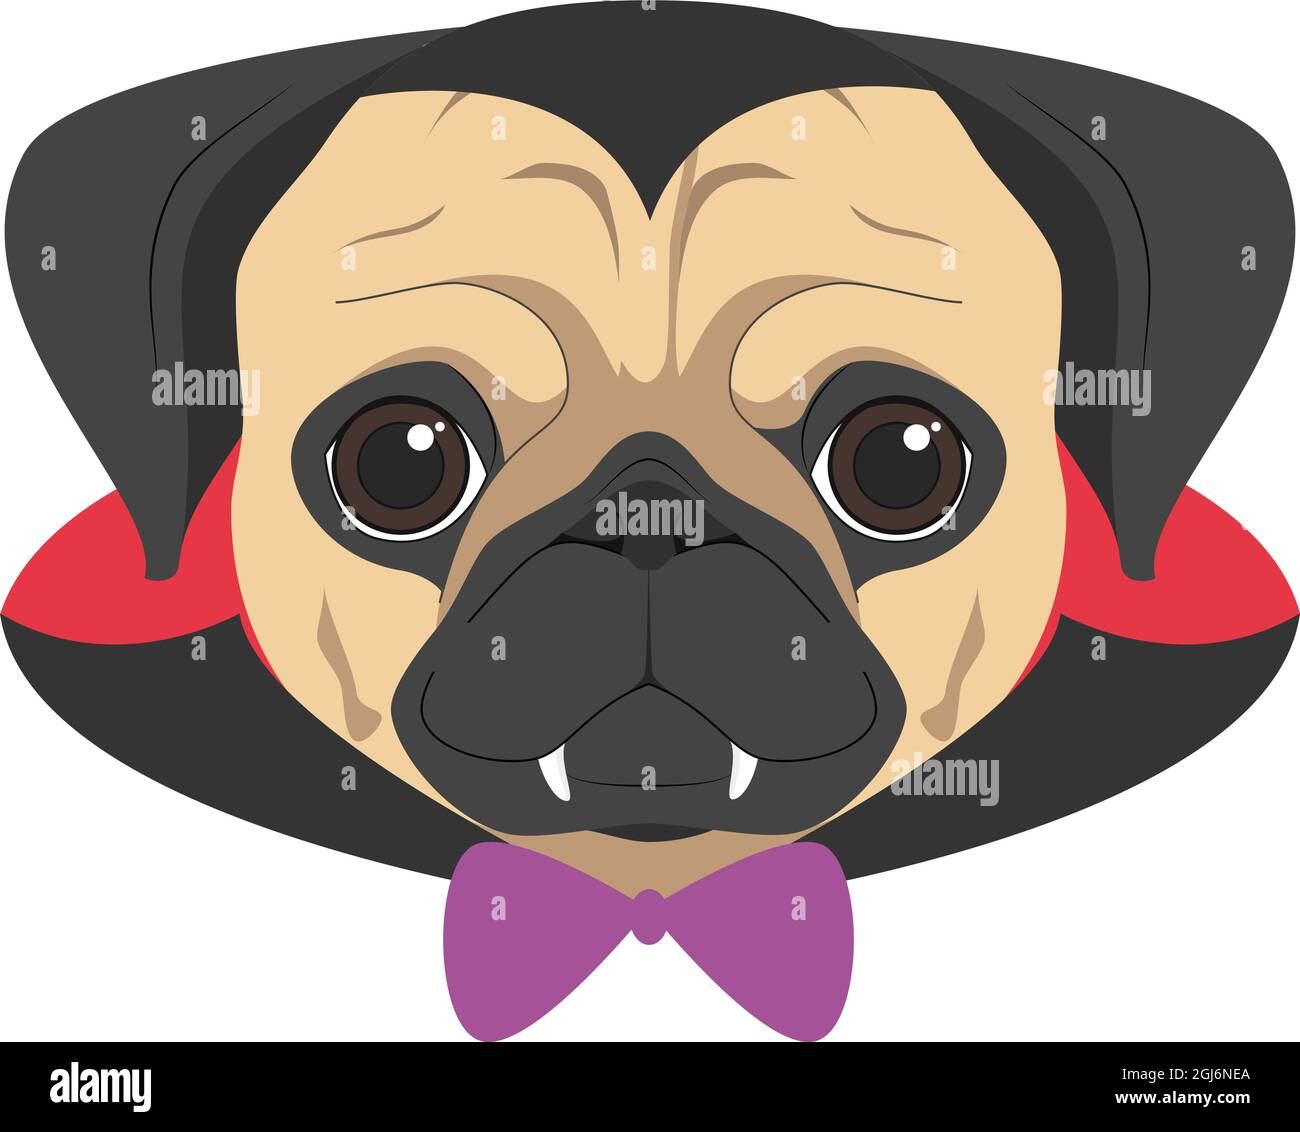 Halloween greeting card. Pug dog dressed as a vampire with fangs, bow tie and cape Stock Vector